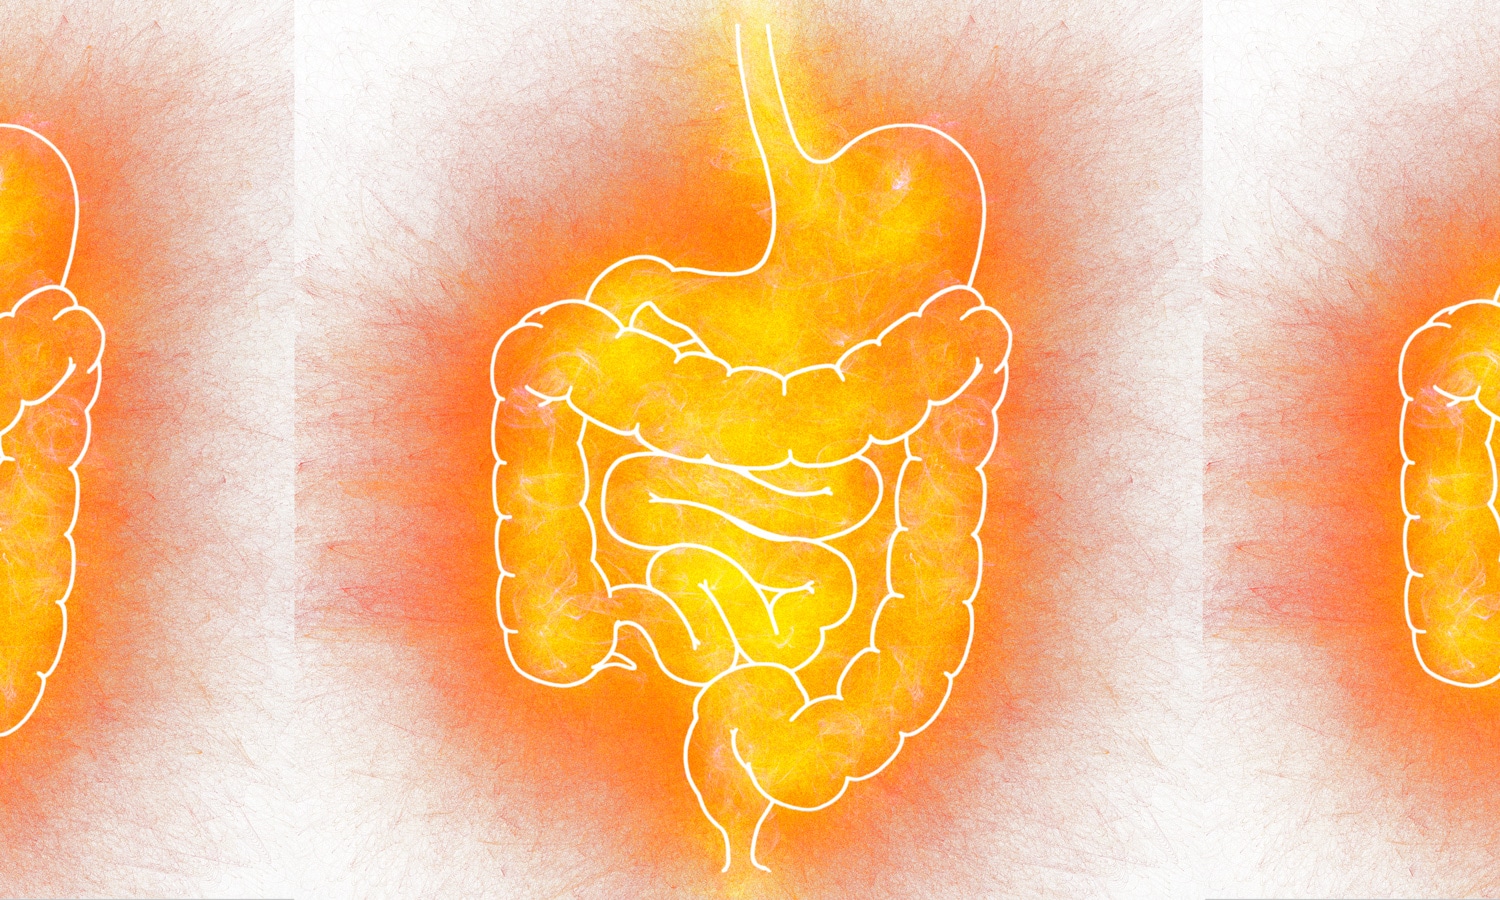 Does Cannabis and Gut Health Boost Your Gut Bacteria?